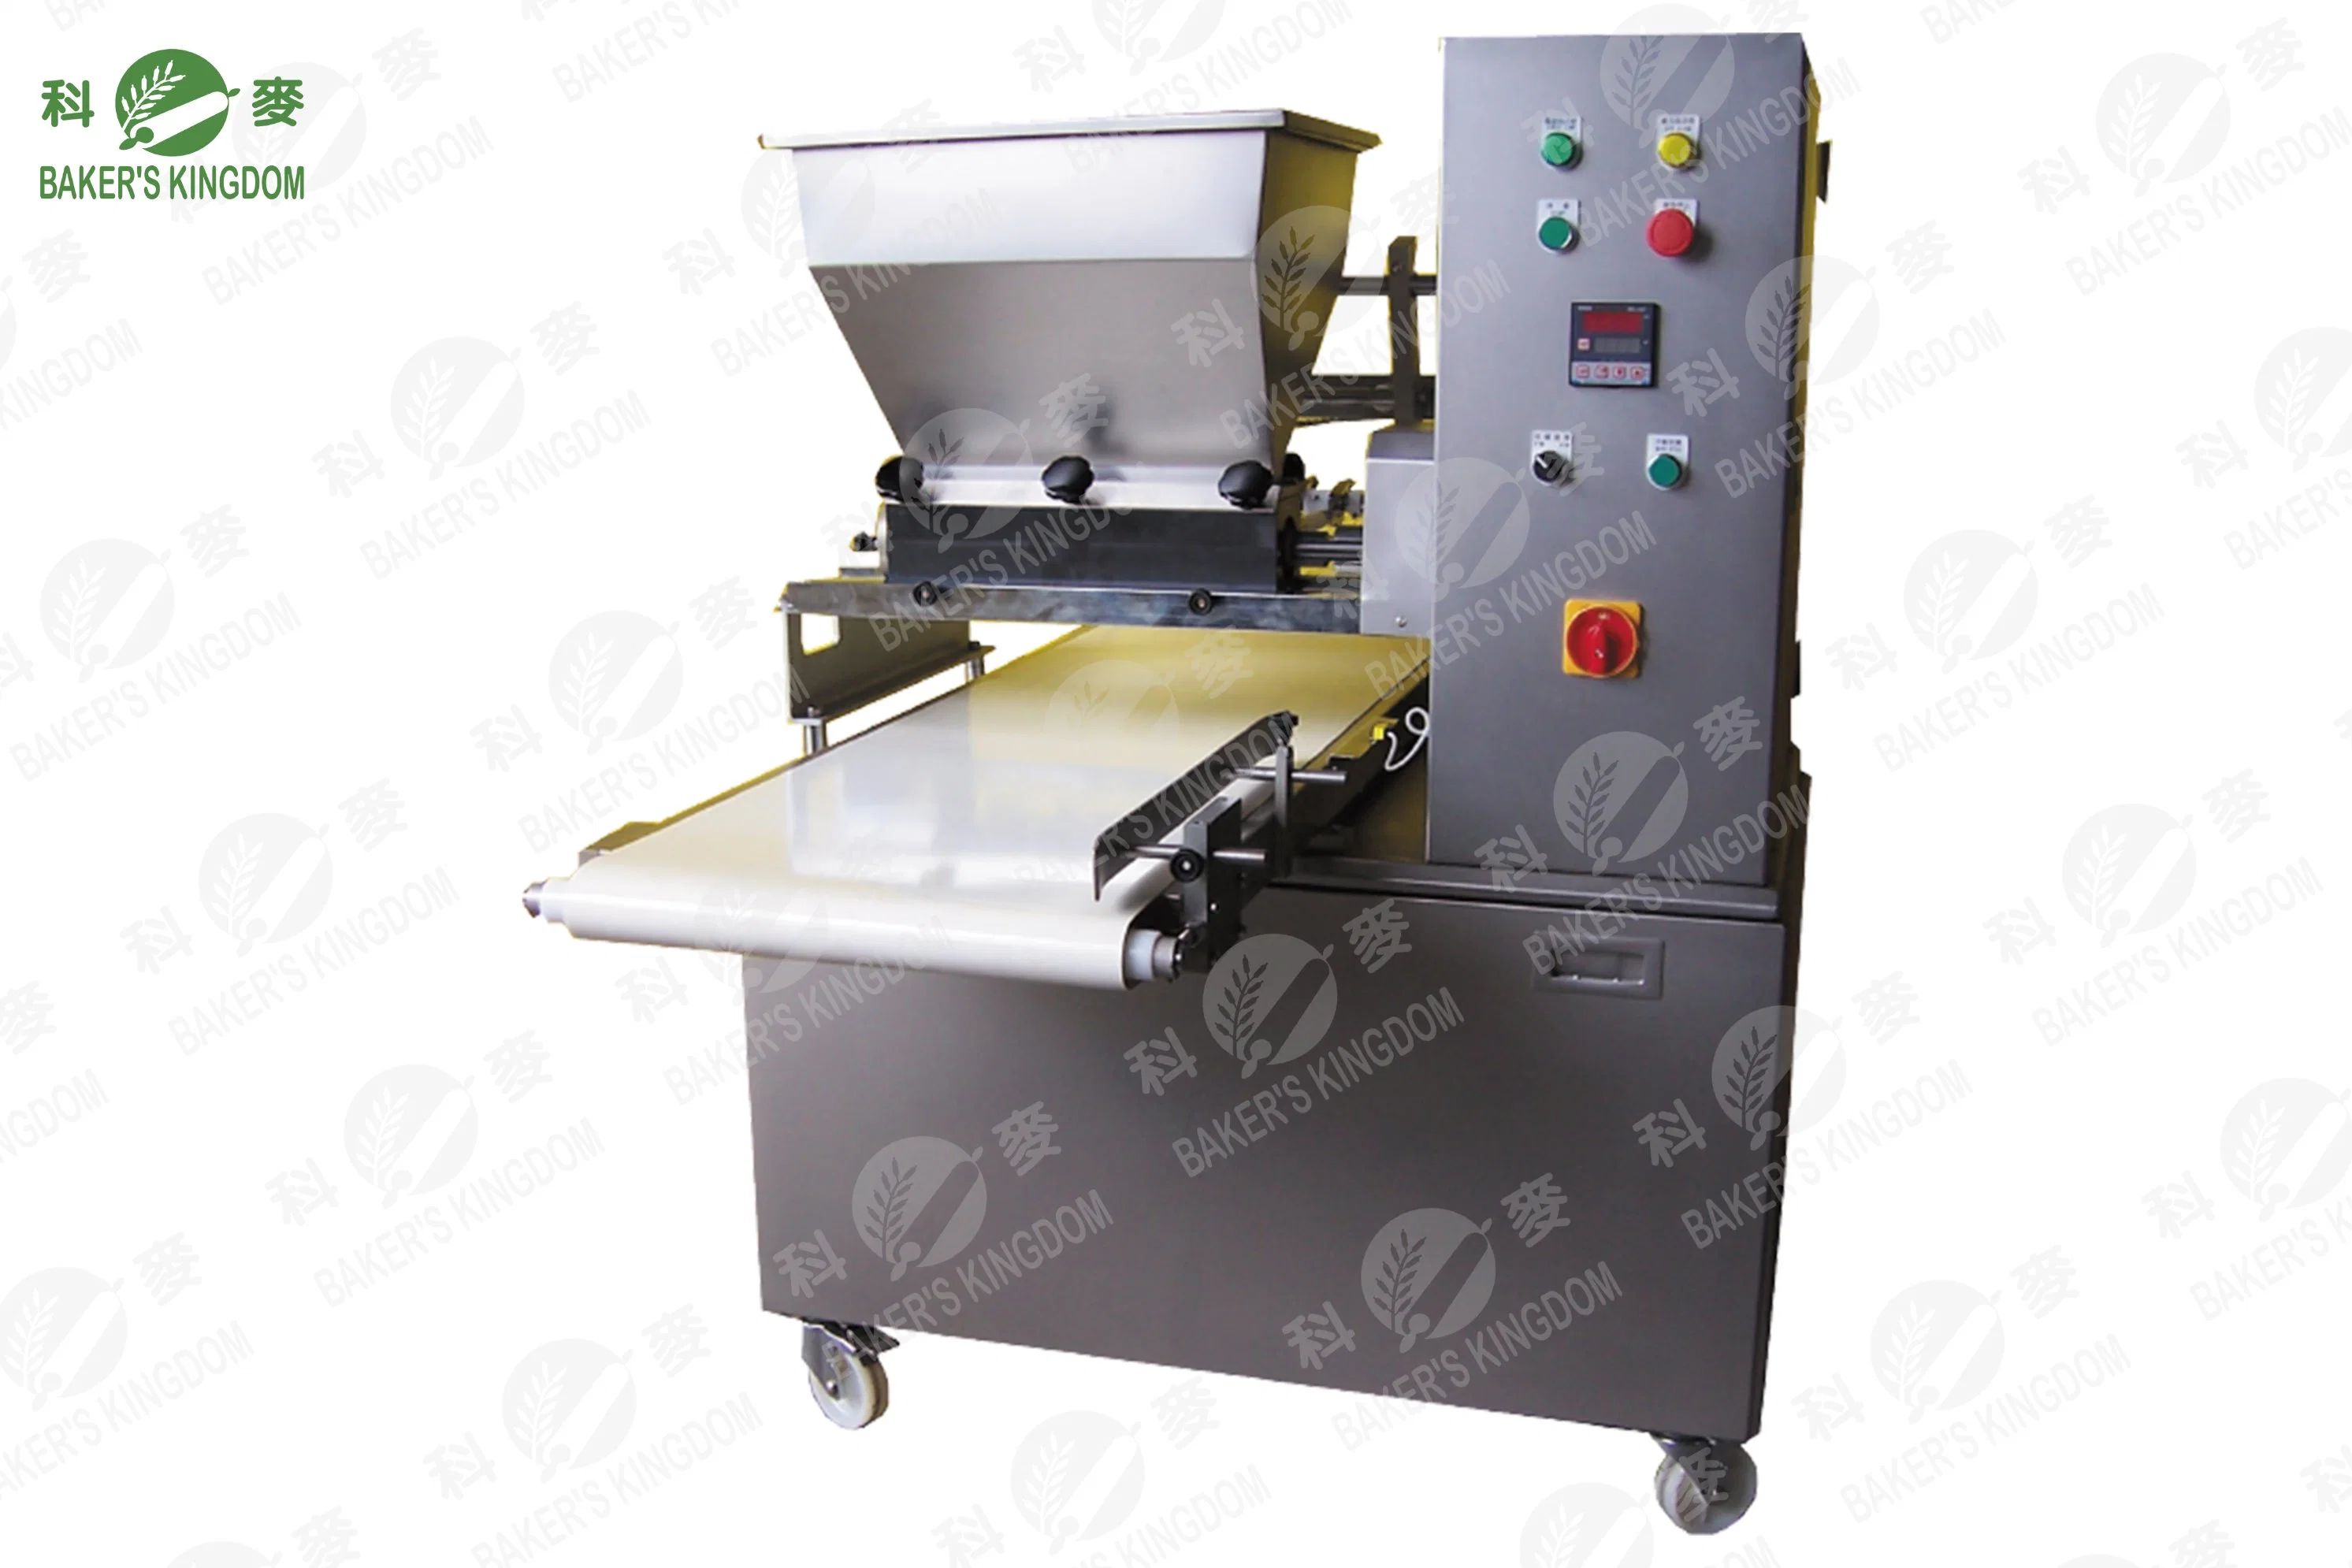 Piston Type Cake Batter and Biscuit Cookie Dough Depositing Depositor Machine